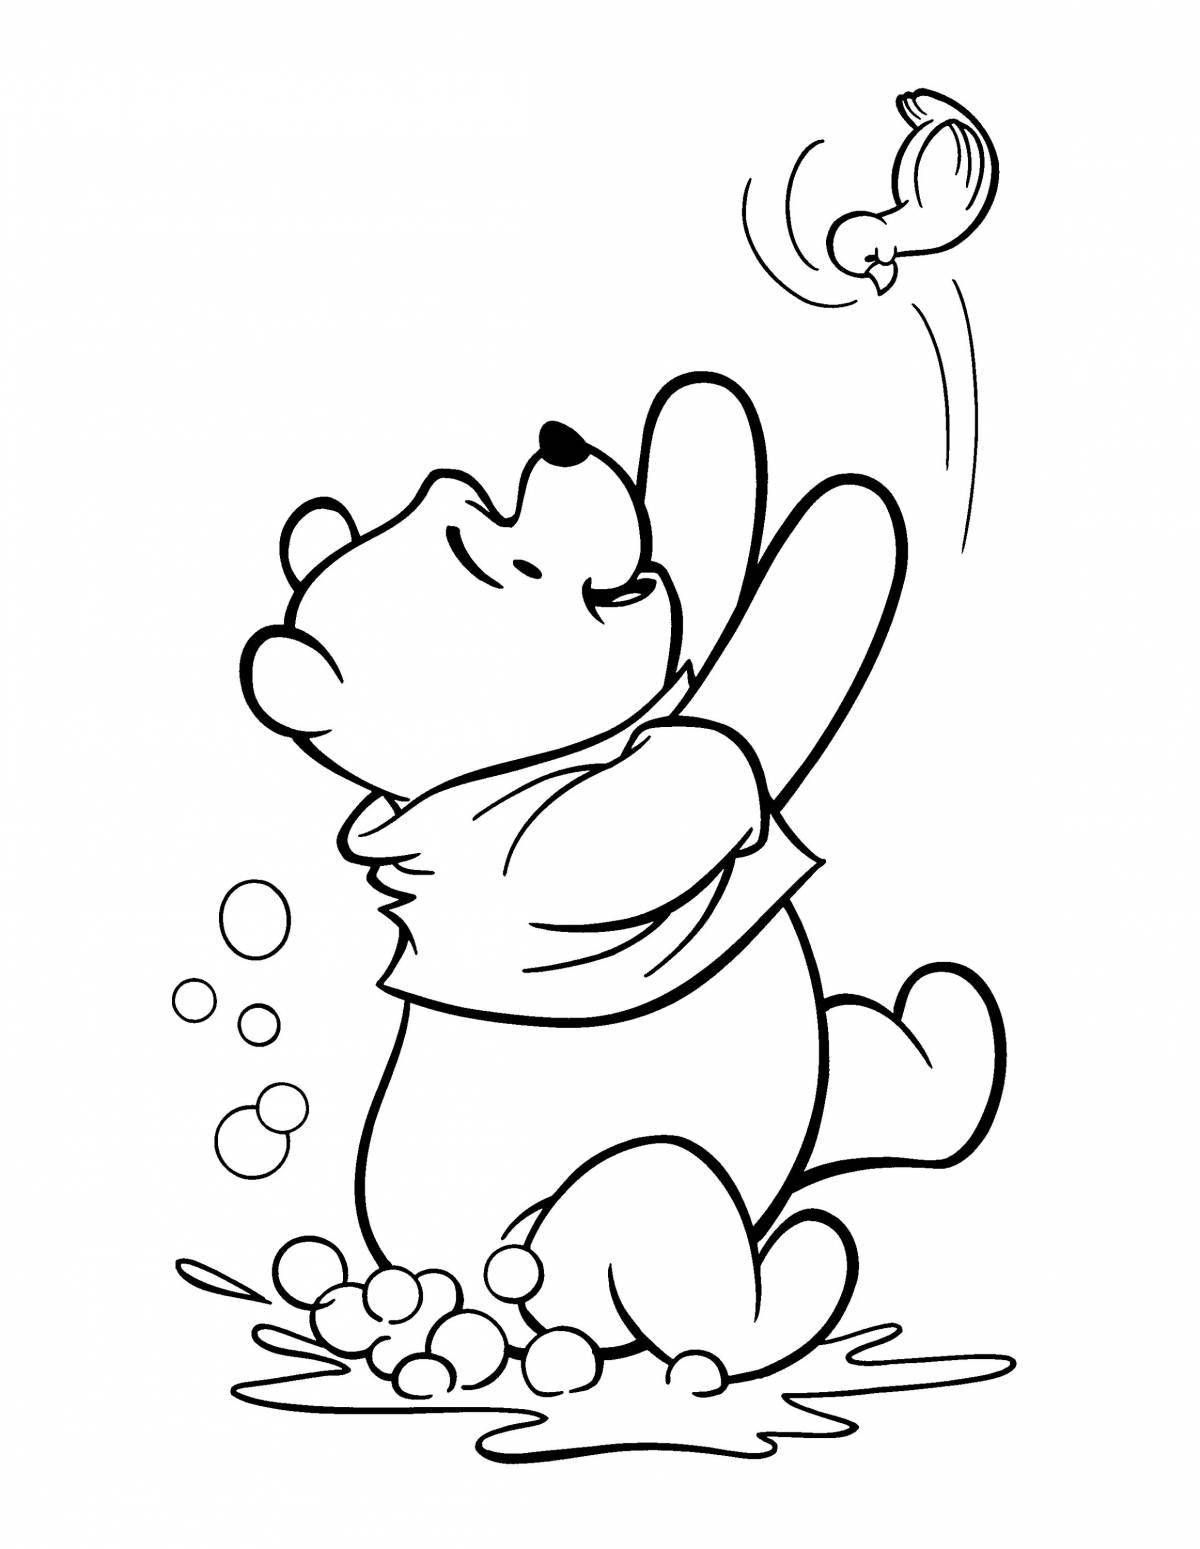 Winnie the pooh magic coloring book for kids